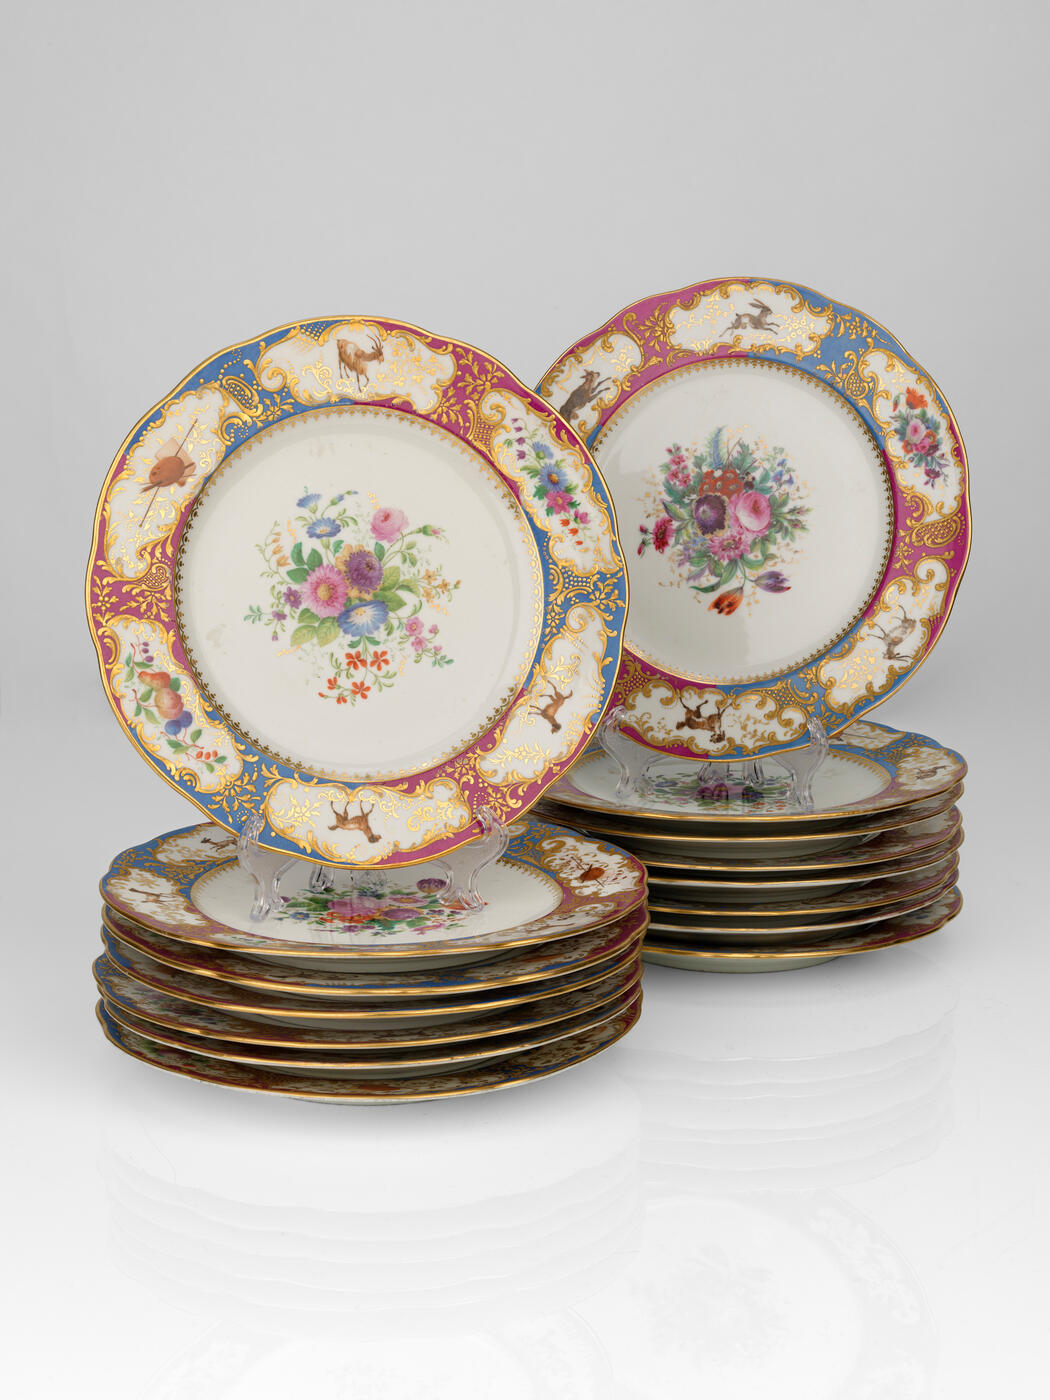 A Set of Fifteen Dinner Plates from the Grand Duke Mikhail Pavlovich Service